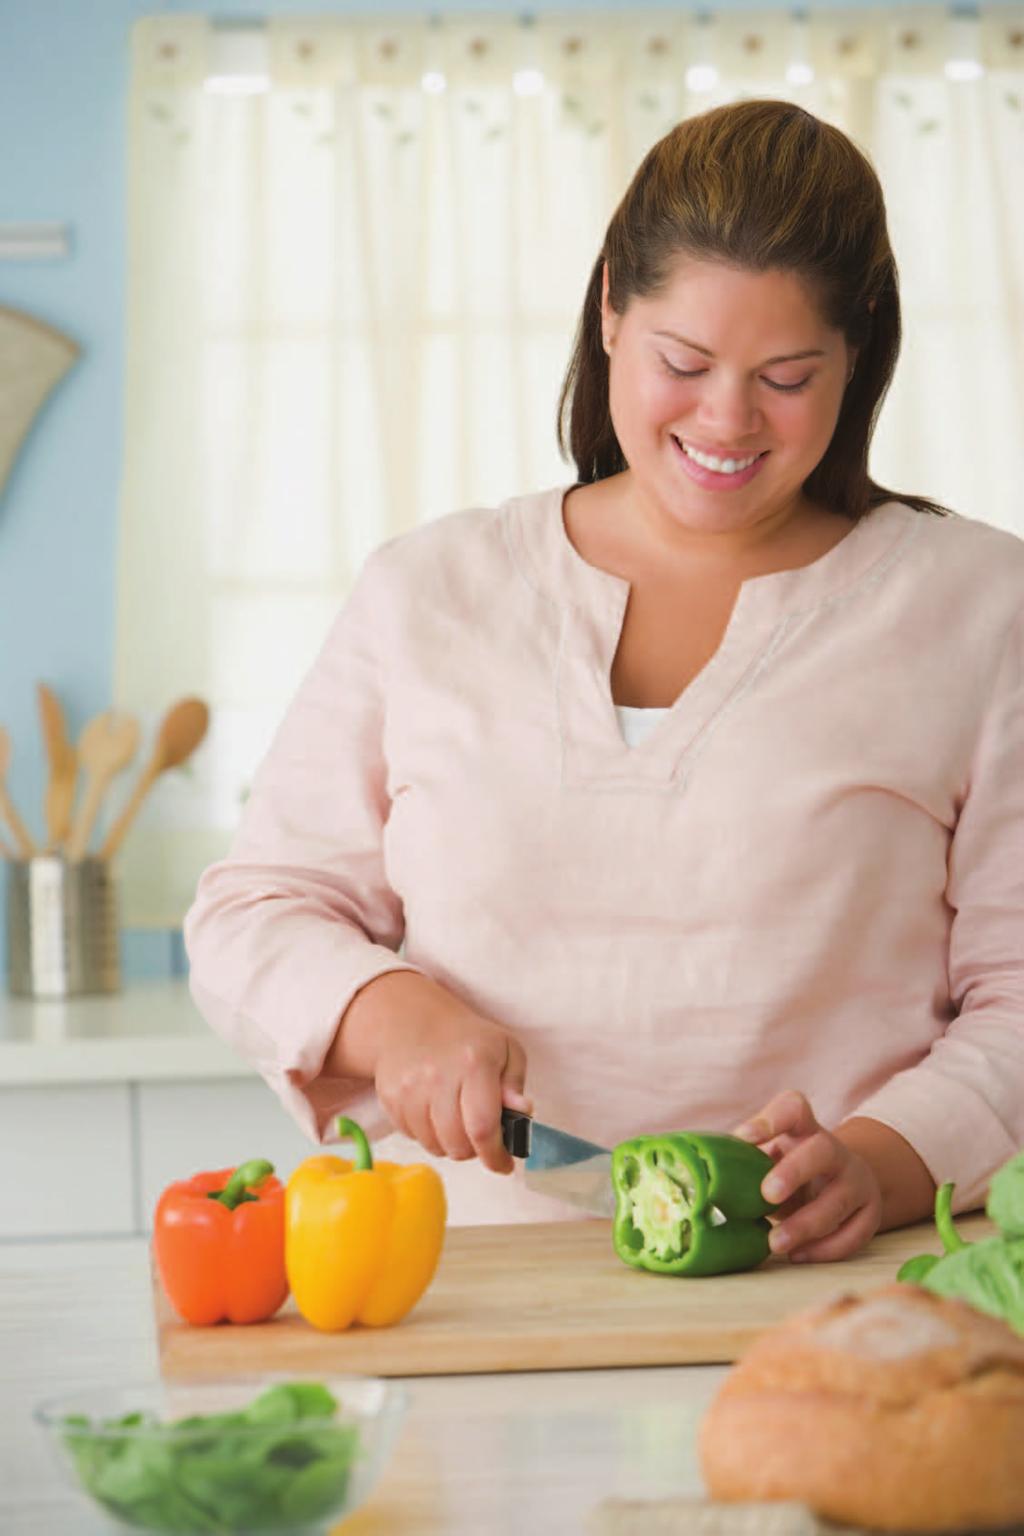 Insurance and Weight Loss Surgery Behavioral health and nutrition screenings are required prior to having weight loss surgery at Saint Clare s. Hospital/Dover.